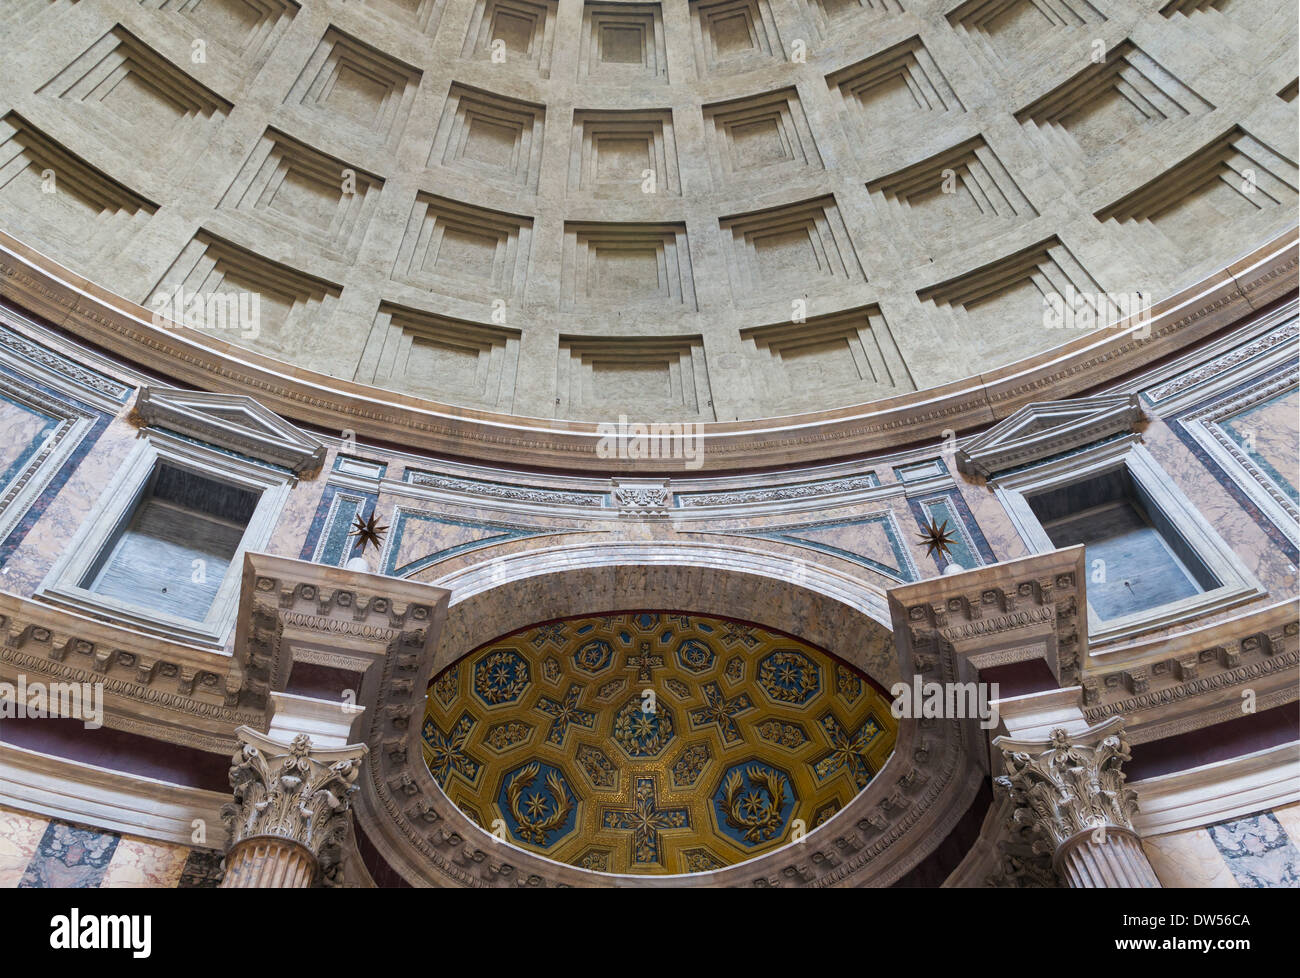 Above the main altar, choir vault of the Pantheon in Rome, Italy. Stock Photo